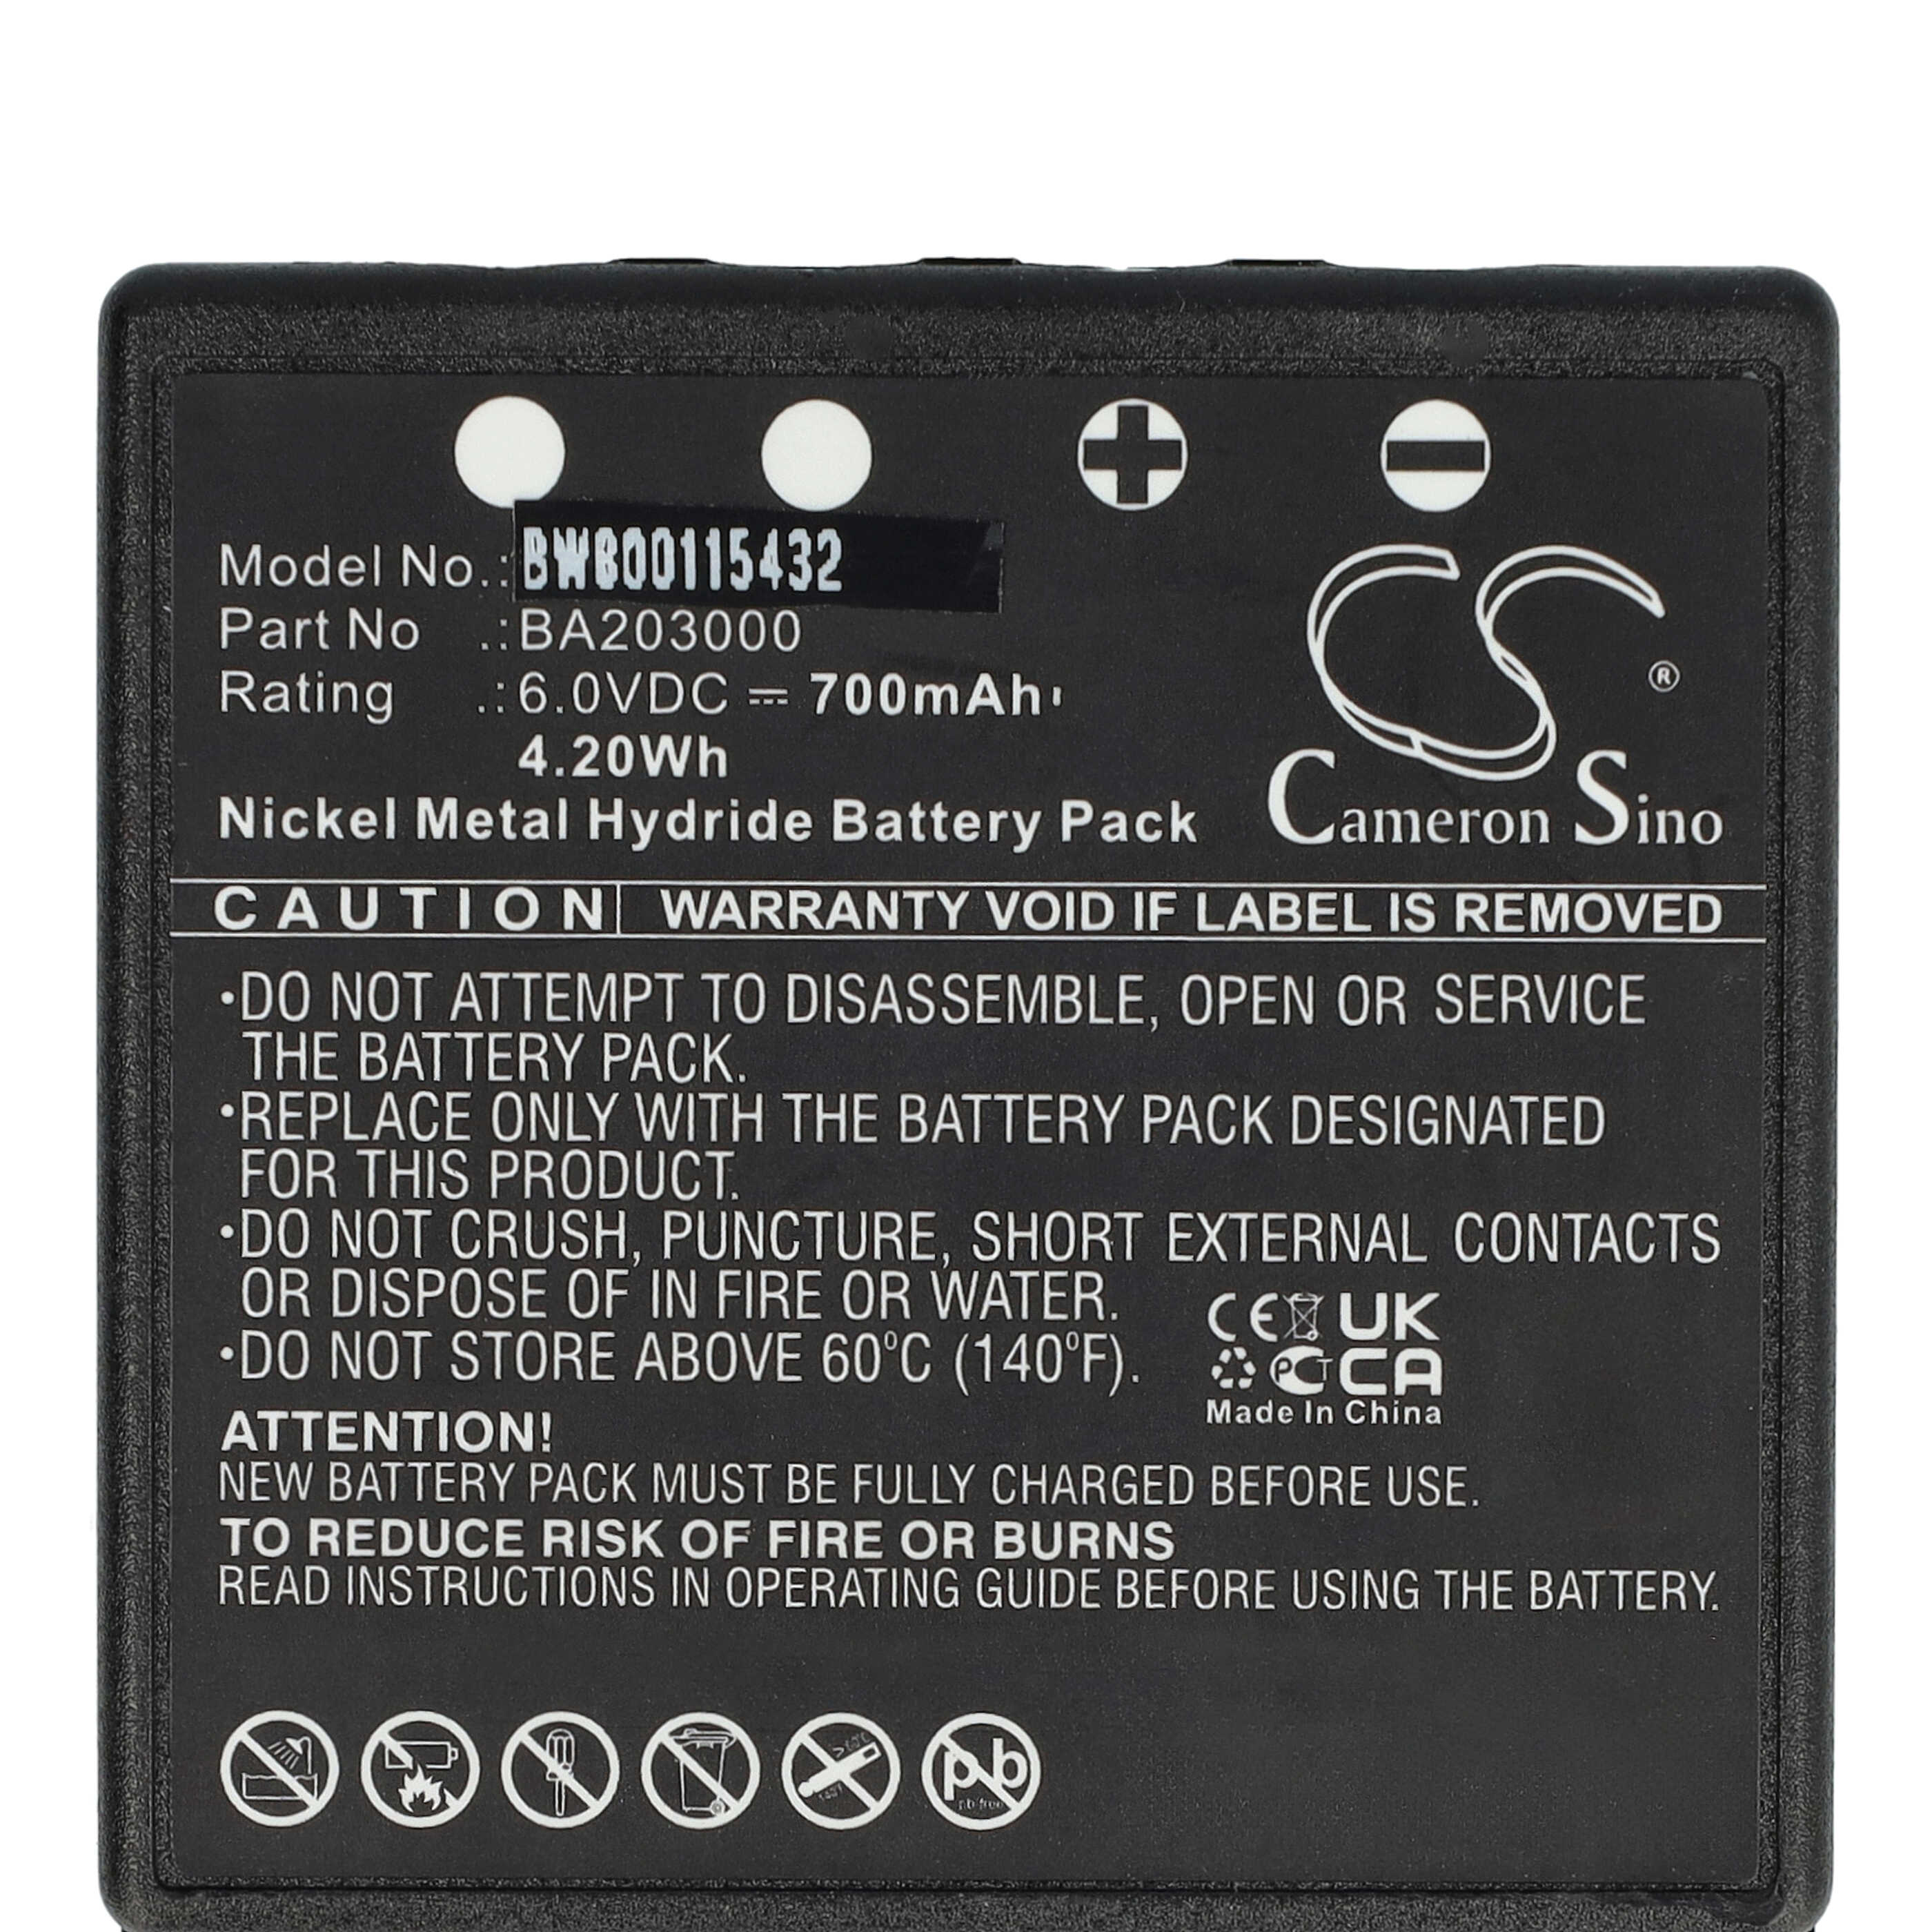 Industrial Remote Control Battery Replacement for HBC BA203000, BA205030, 005-01-00615 - 700mAh 6V NiMH